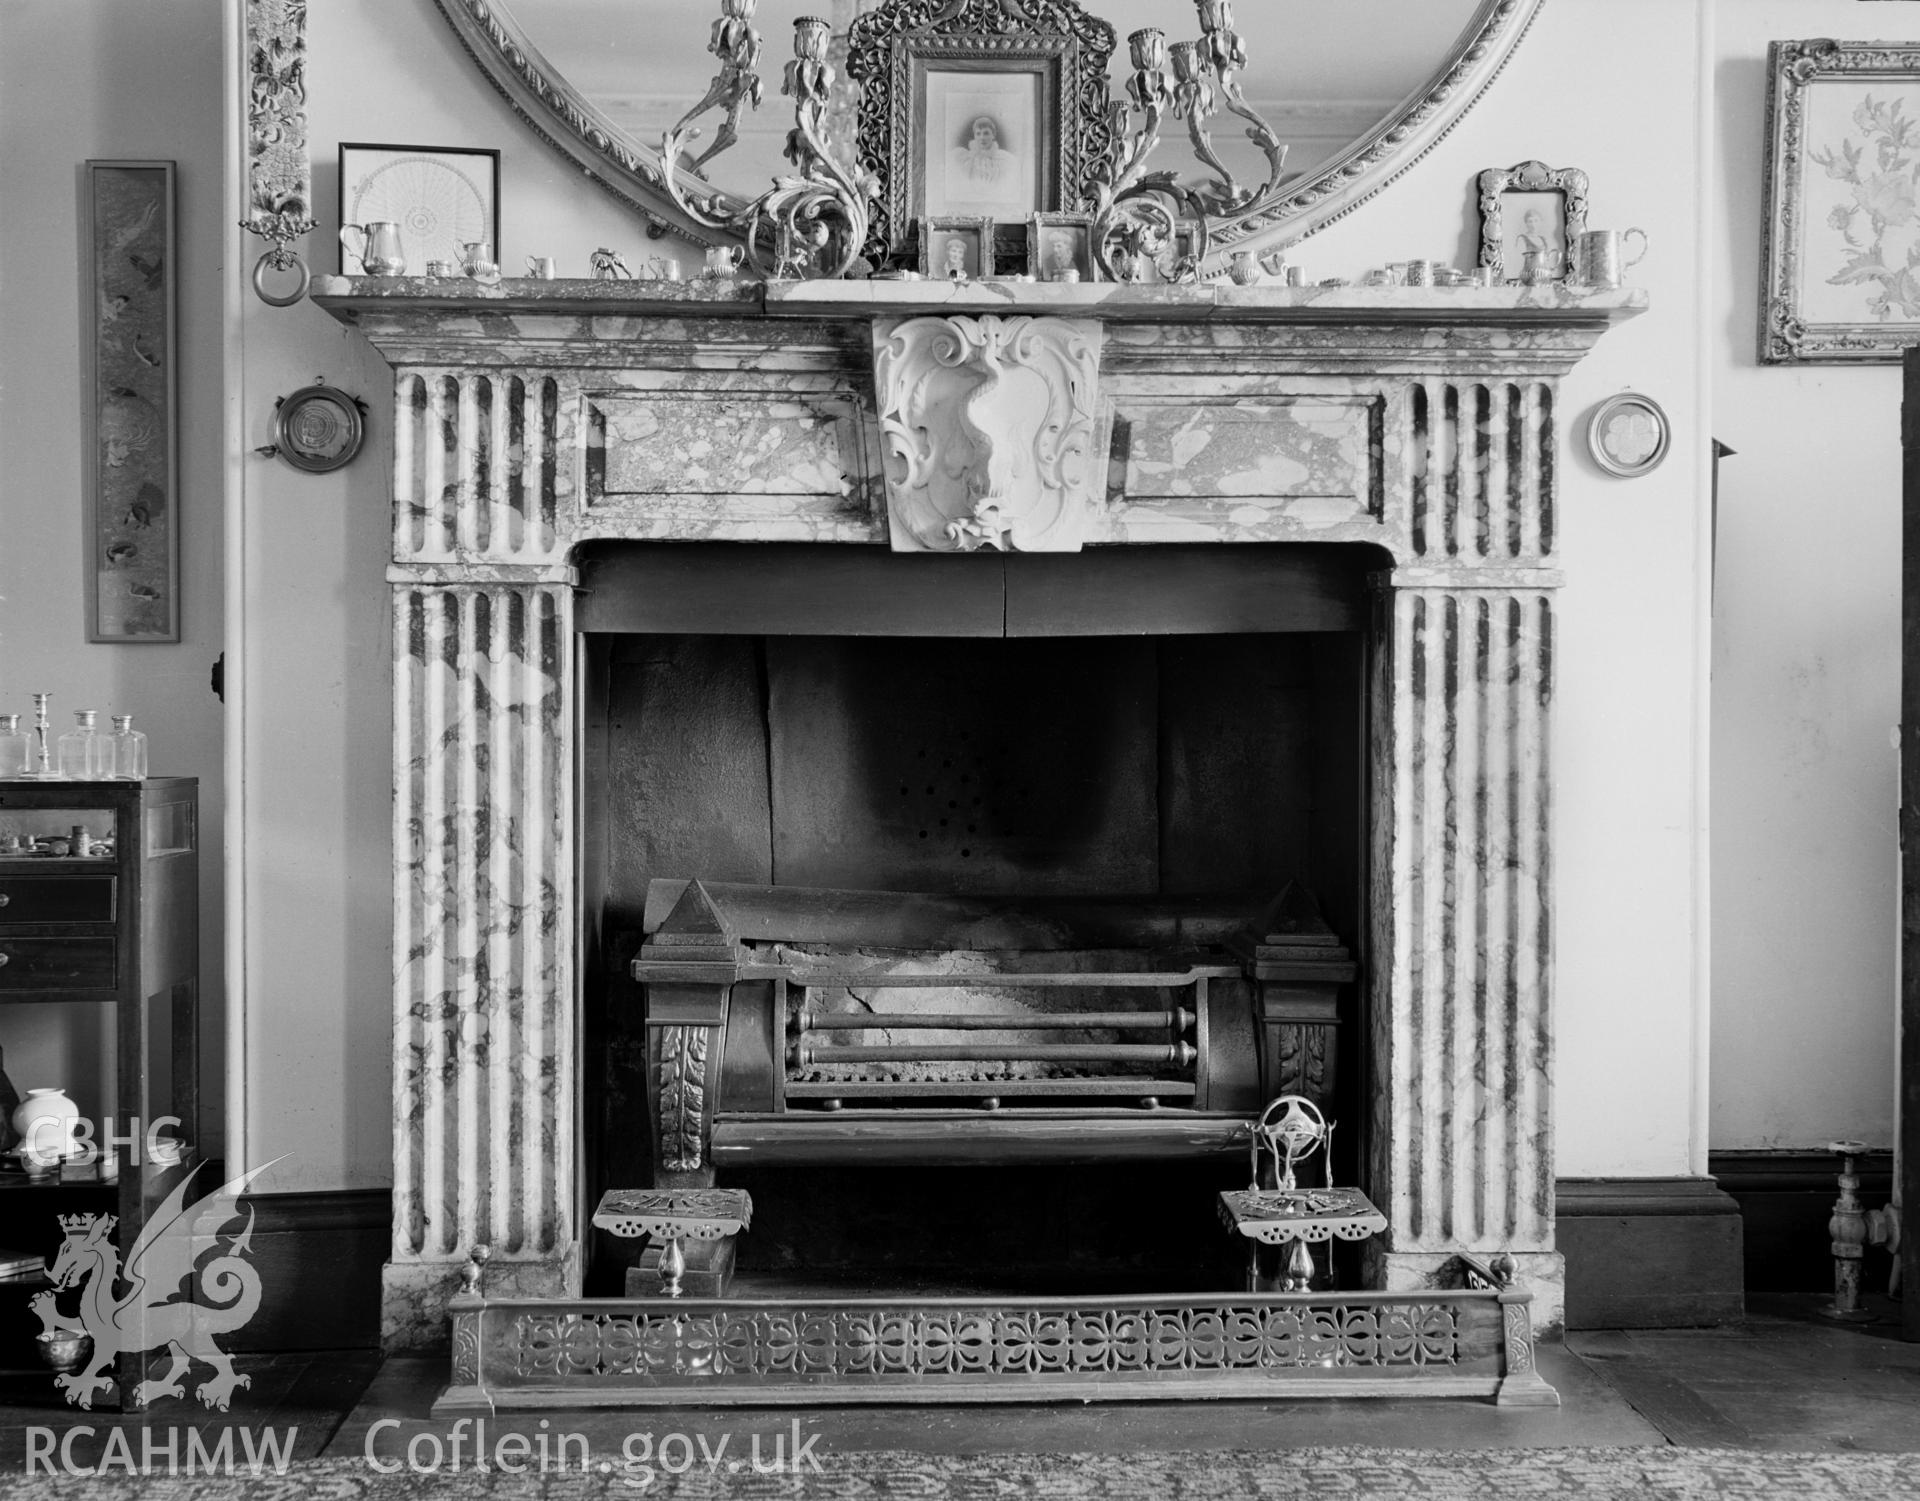 Interior view showing fireplace